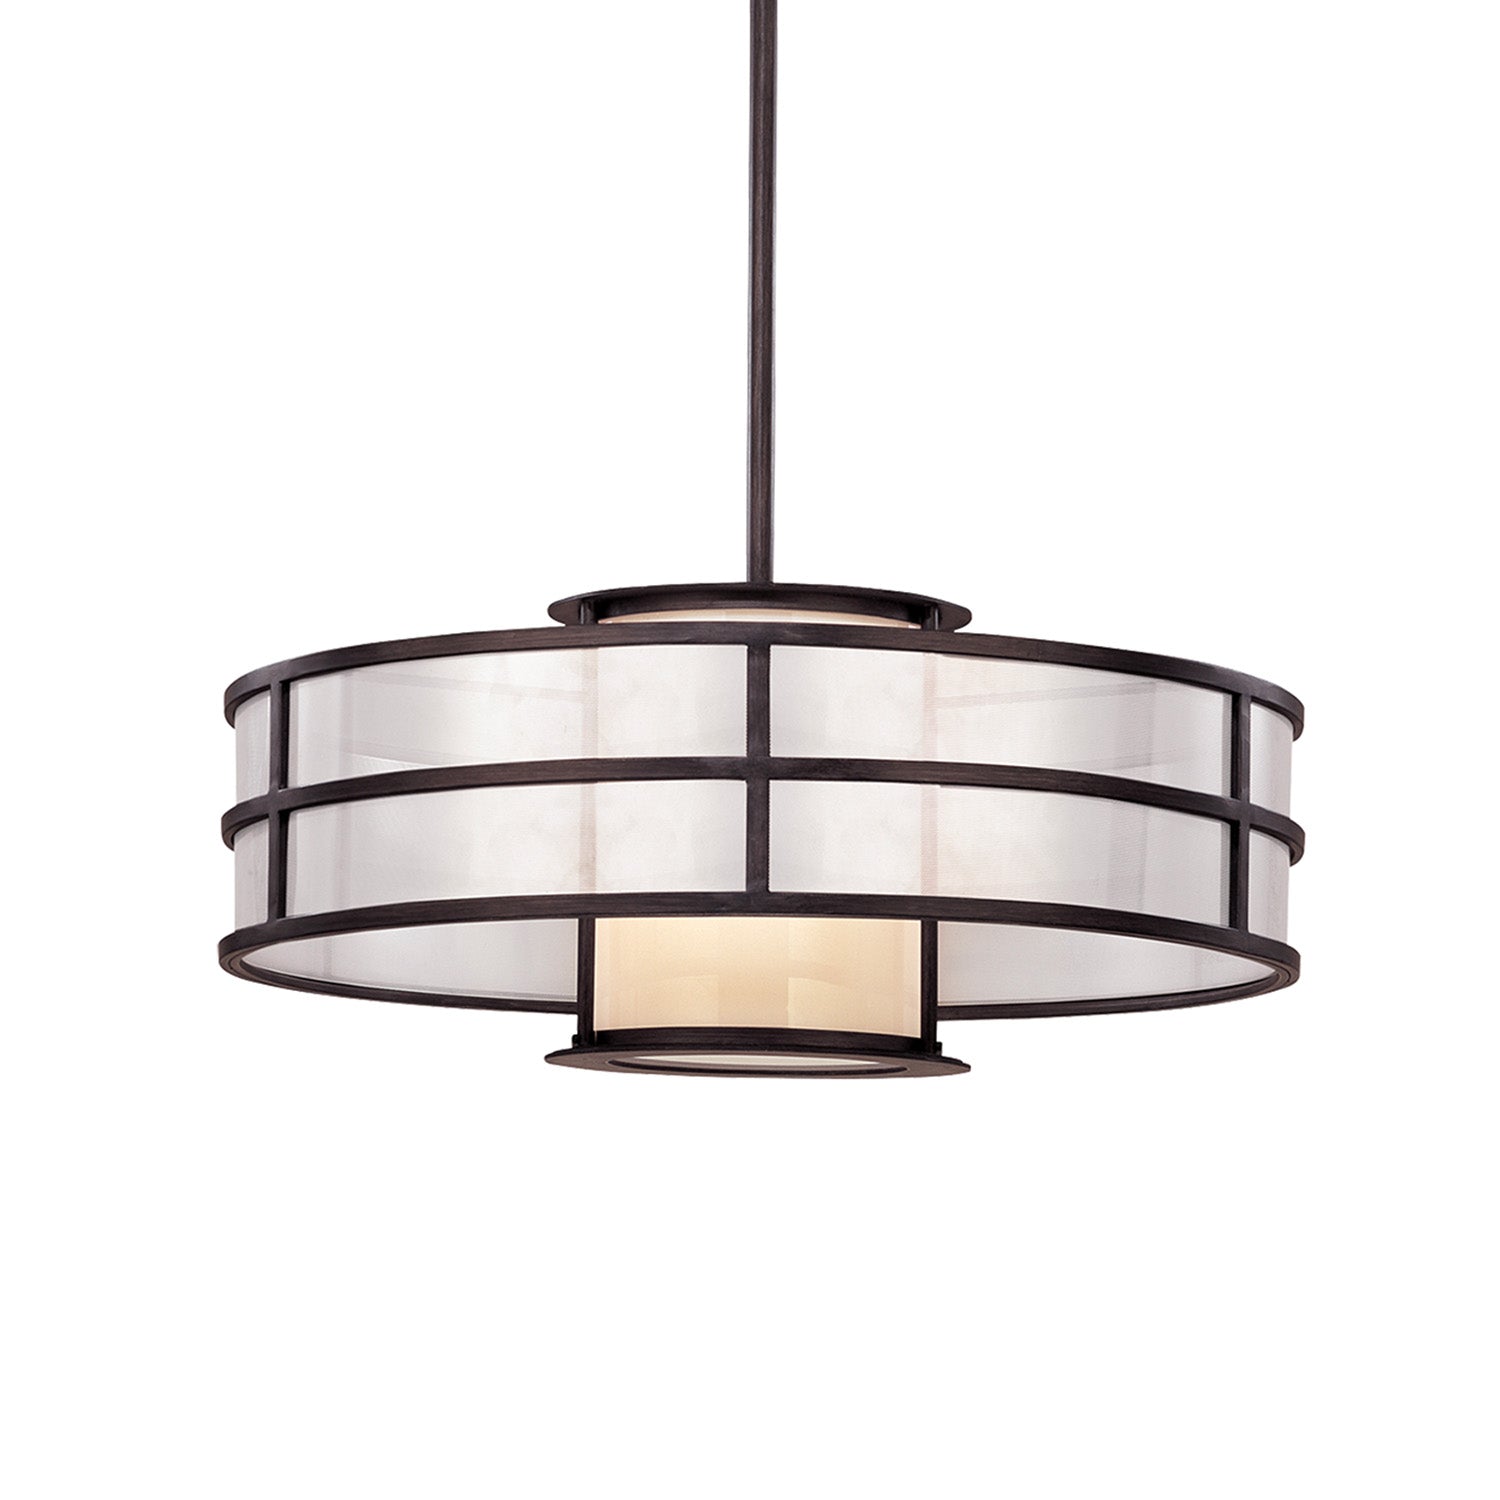 DISCUS - Black and Glass Canopy Effect Pendant